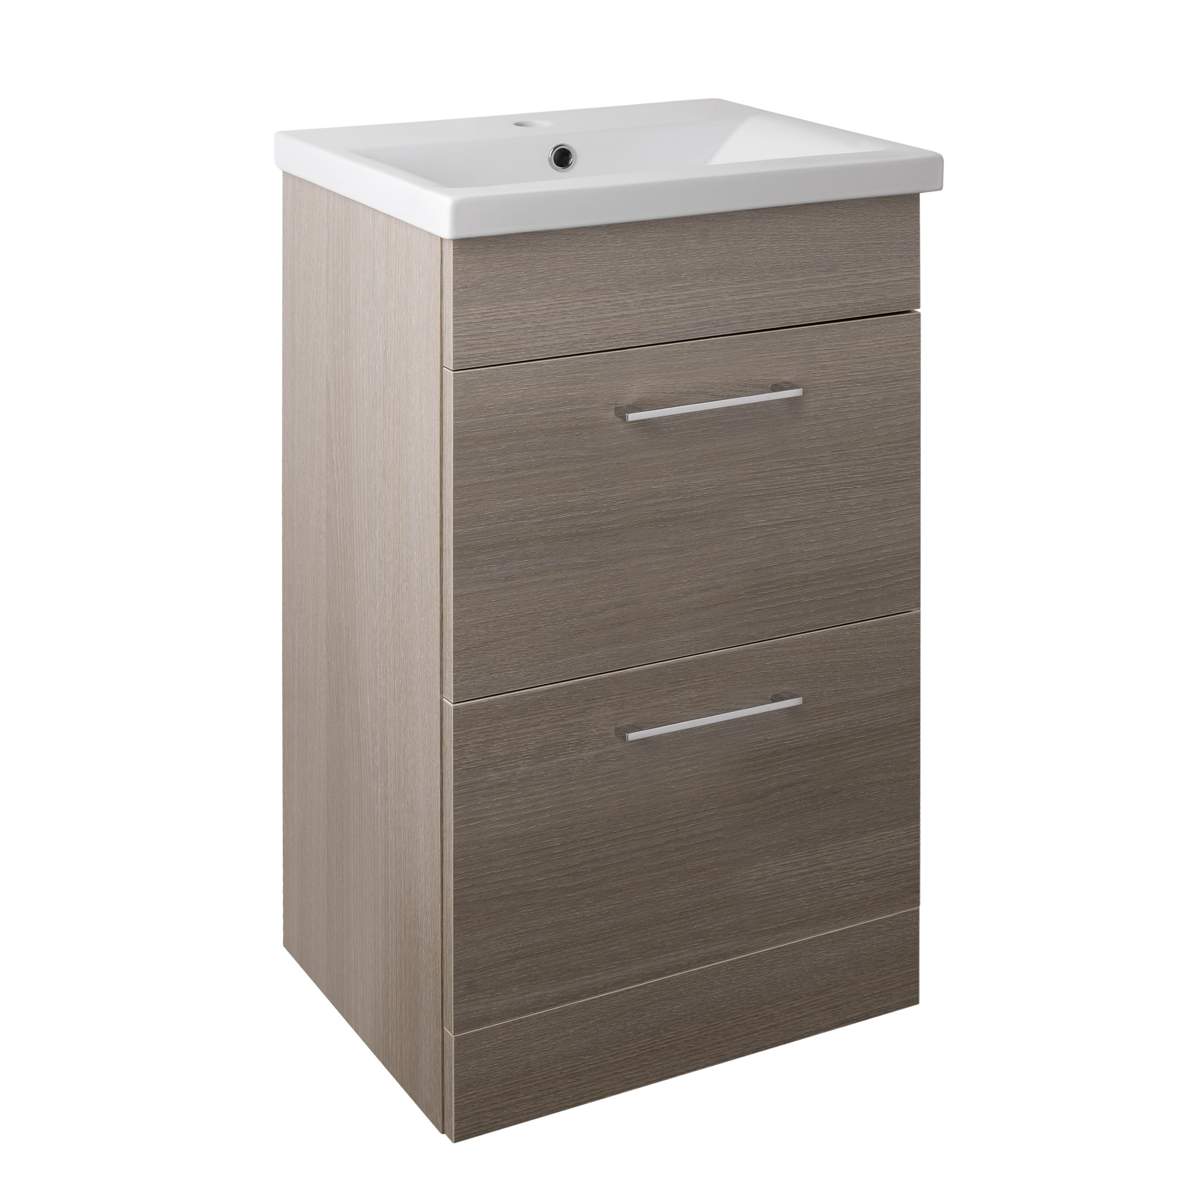 JTP Pace Units 500mm Floor Standing Unit with Drawers and Basin in Grey